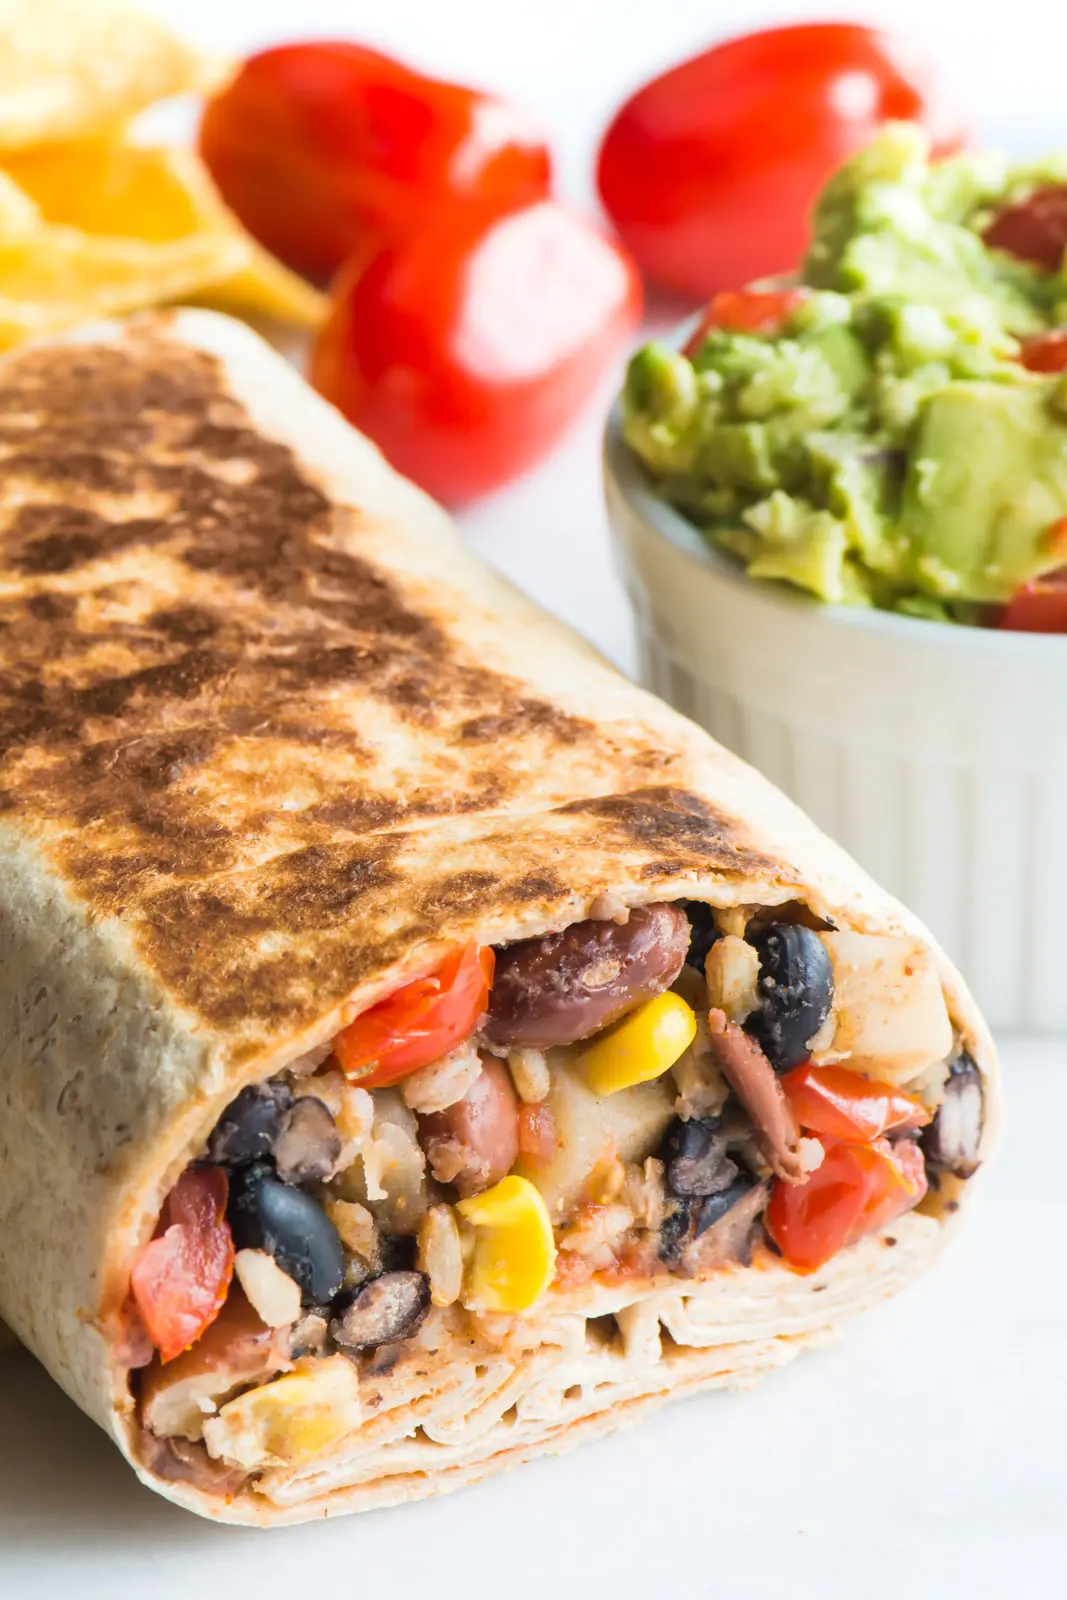 A crispy black bean burrito sits next to a bowl of guacamole and fresh cherry tomatoes.